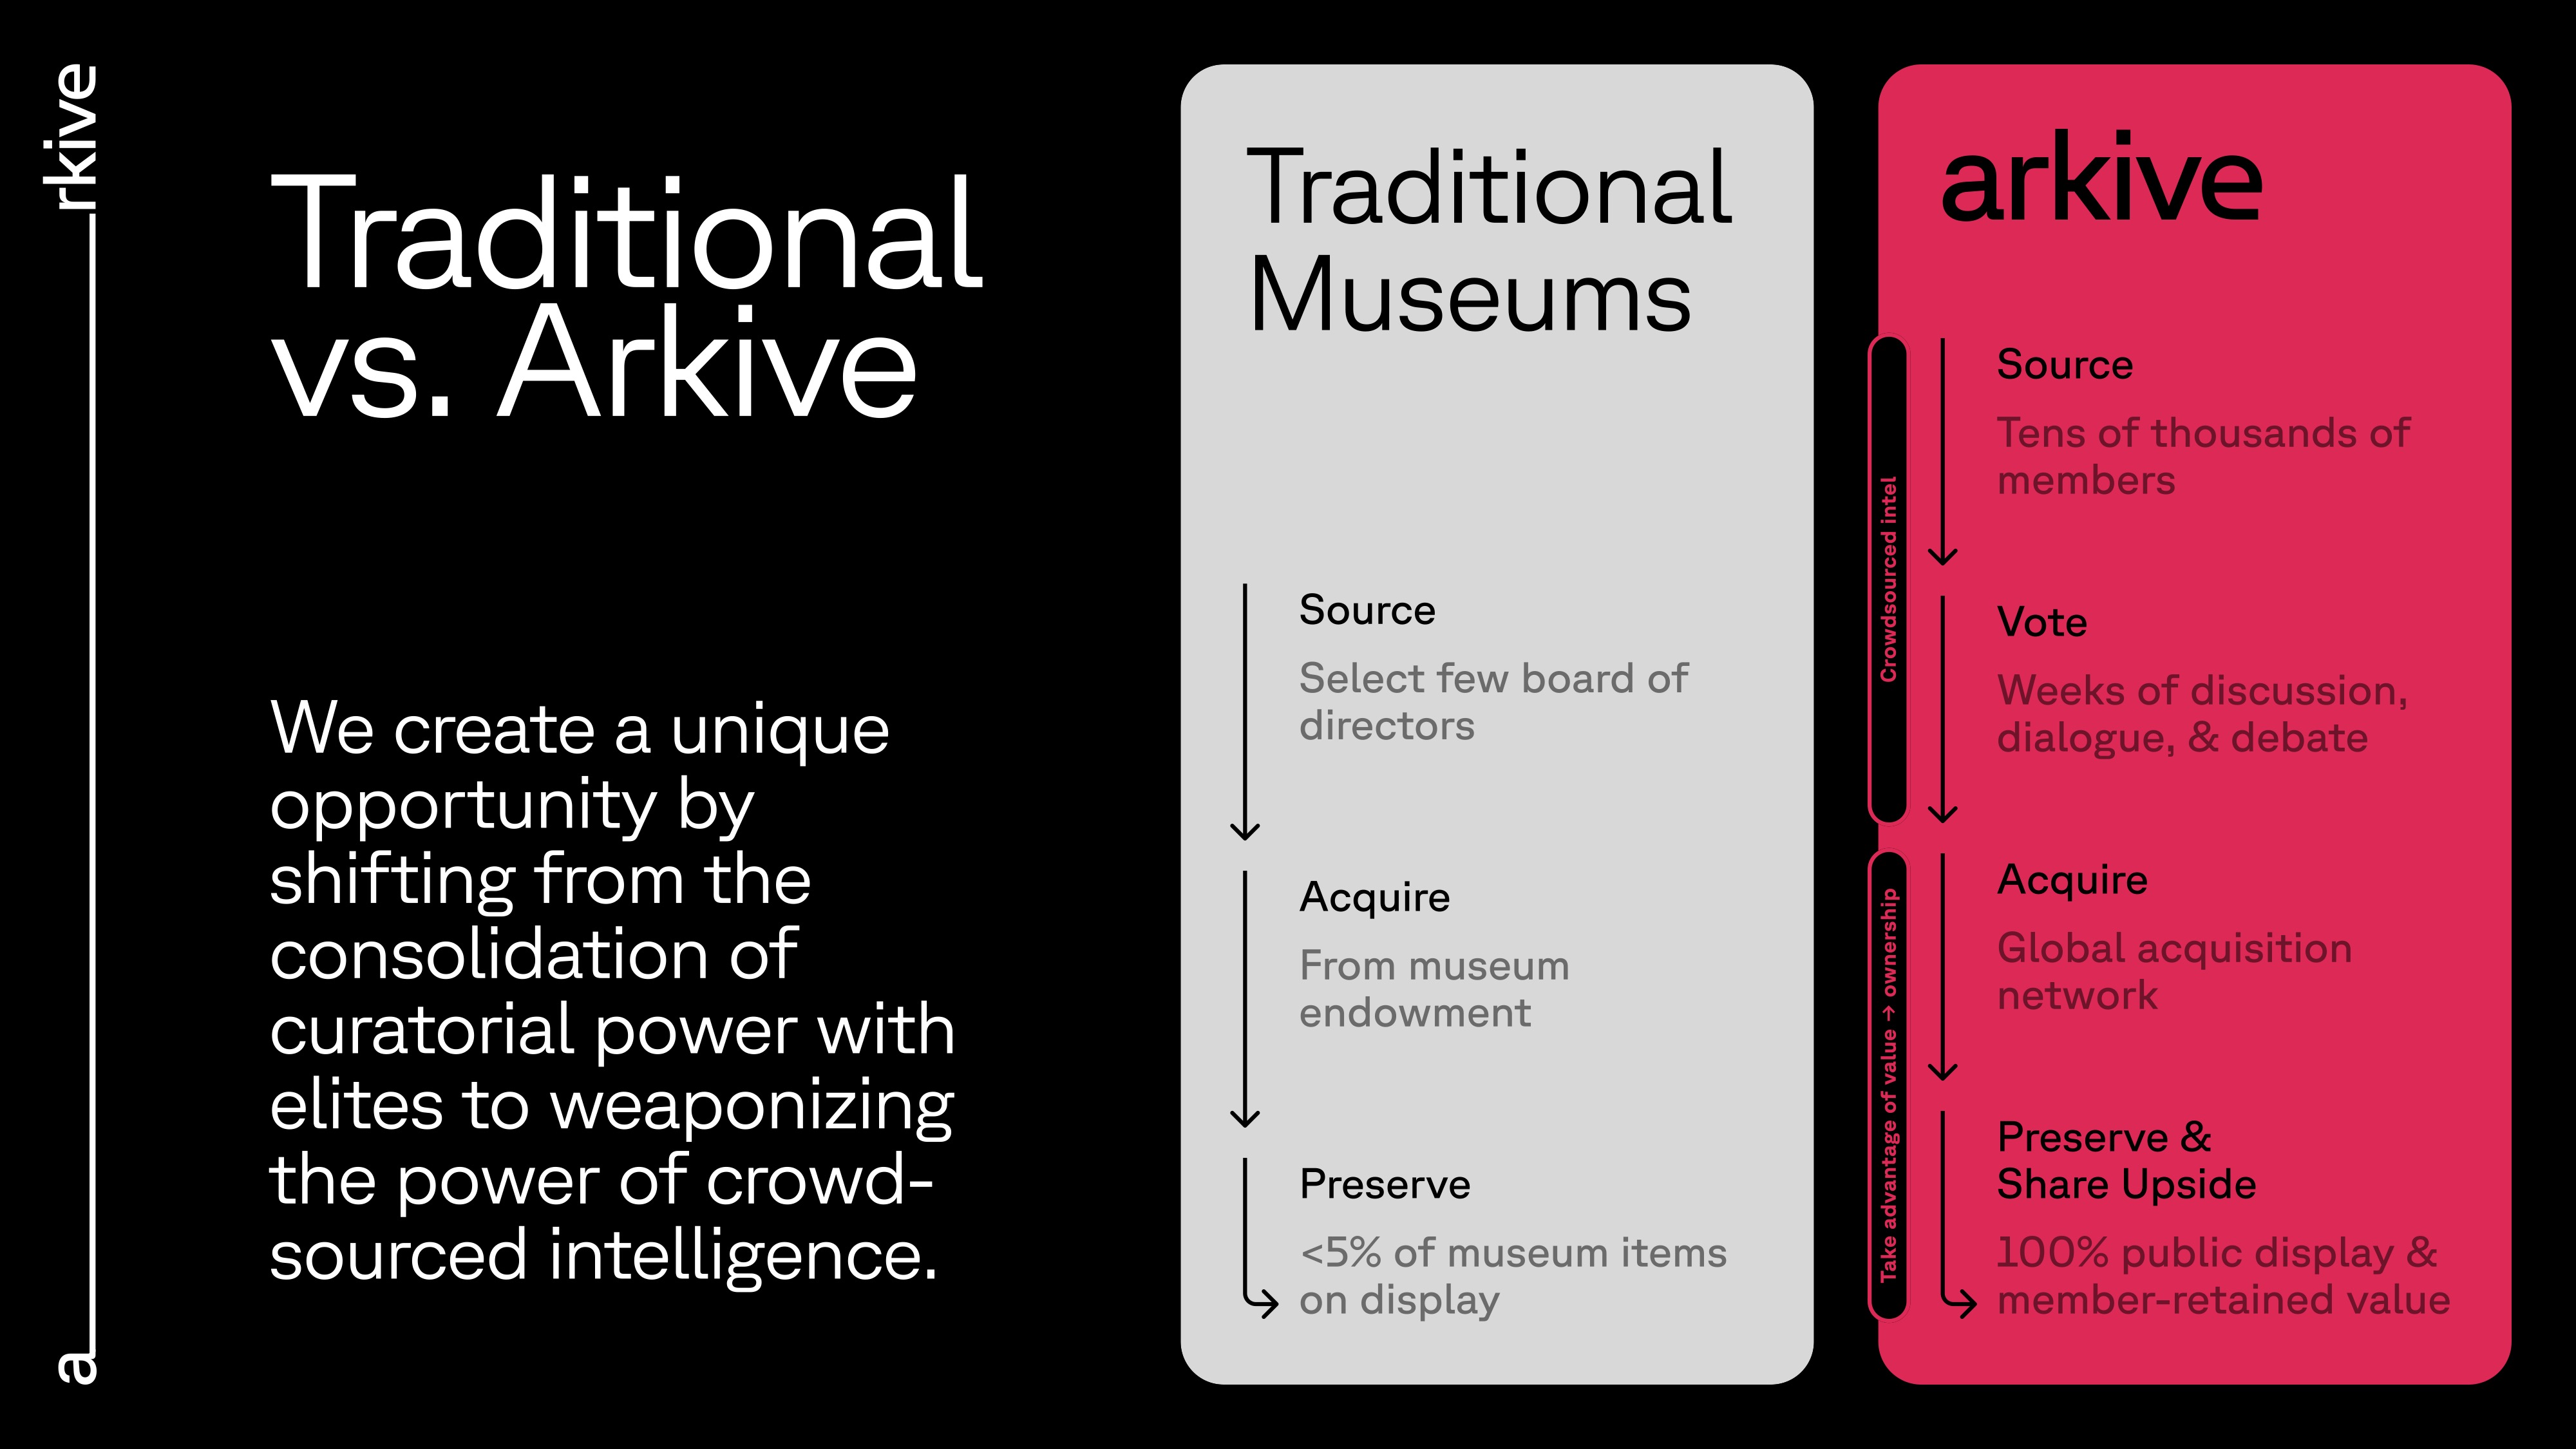 Slide 4 - We create a unique opportunity by shifting from the consolidation of curatorial power with elites to weaponizing the power of crowd- sourced intelligence.